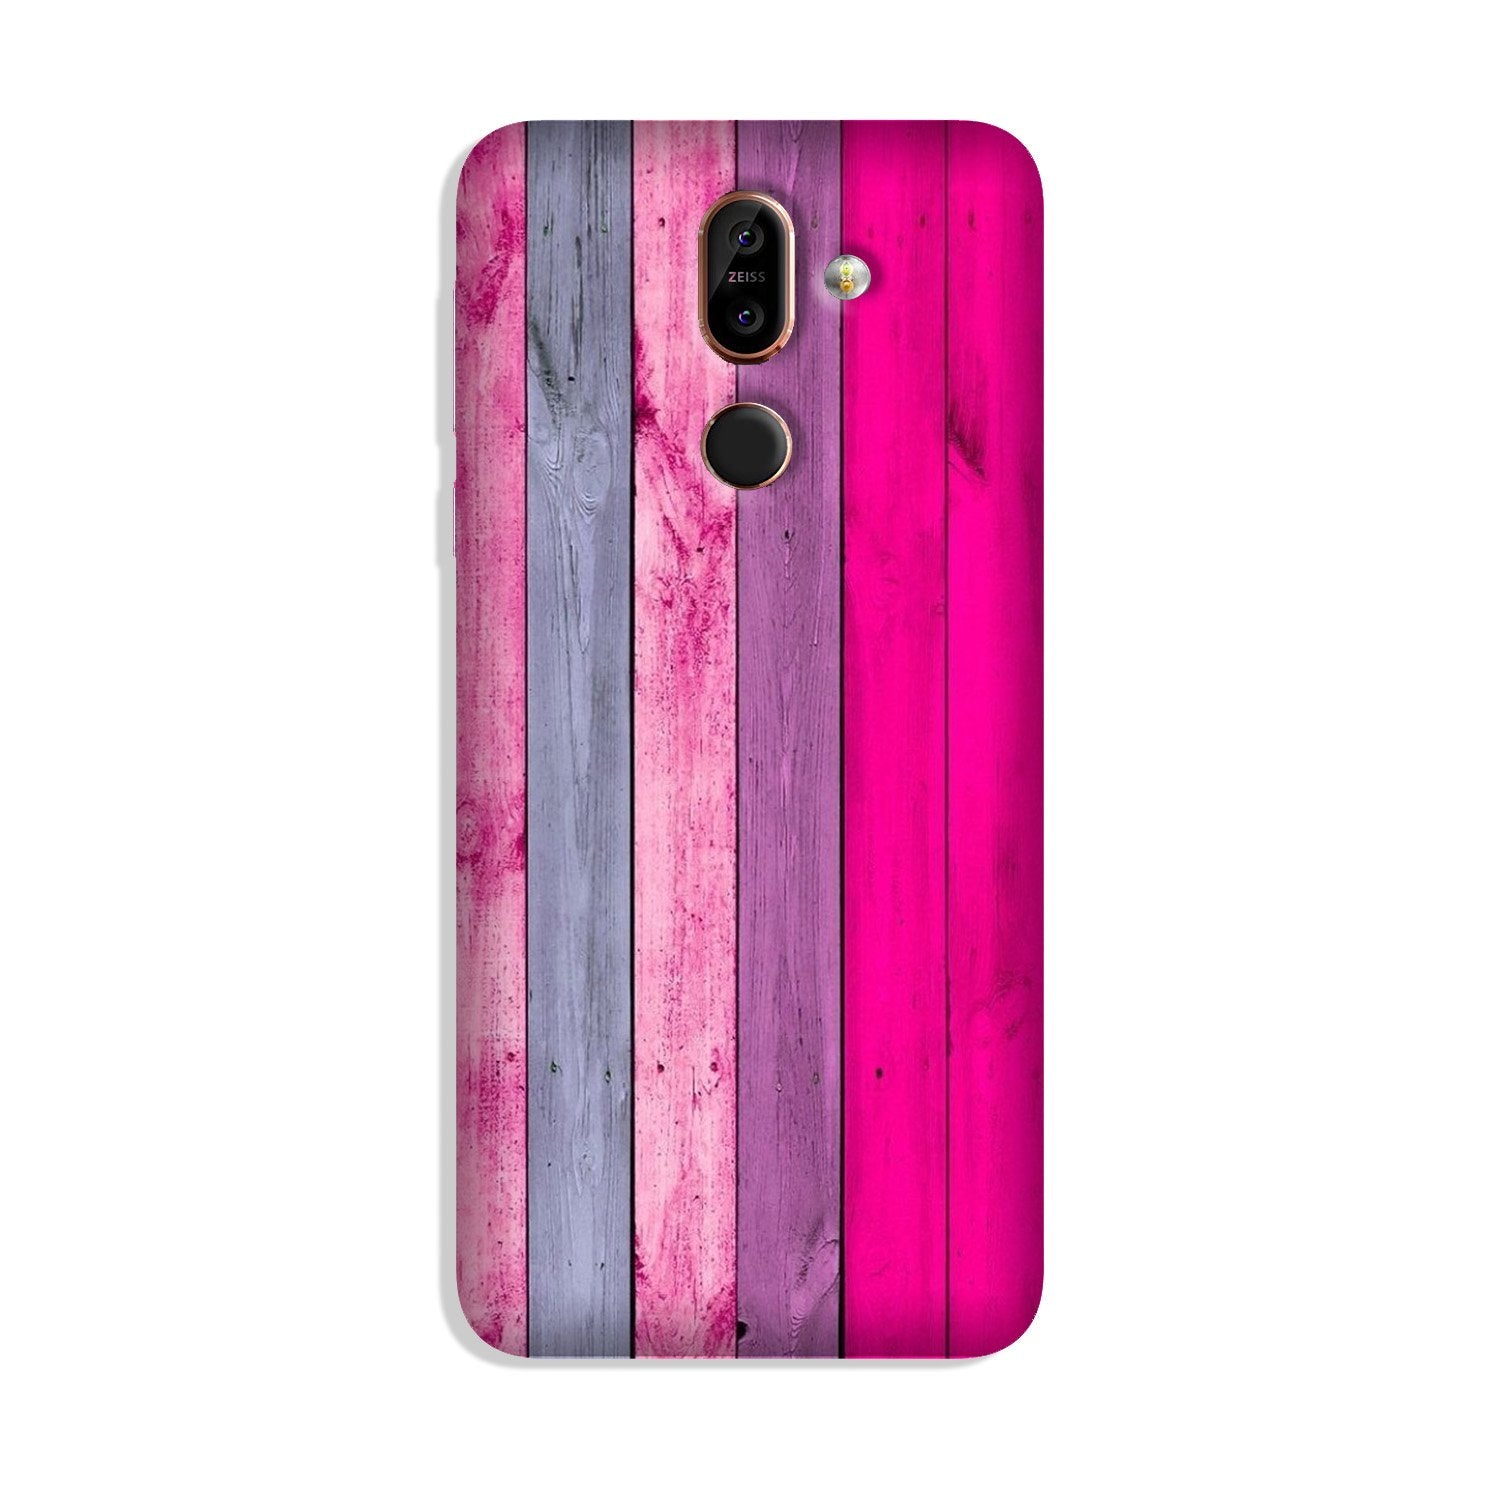 Wooden look Case for Nokia 8.1